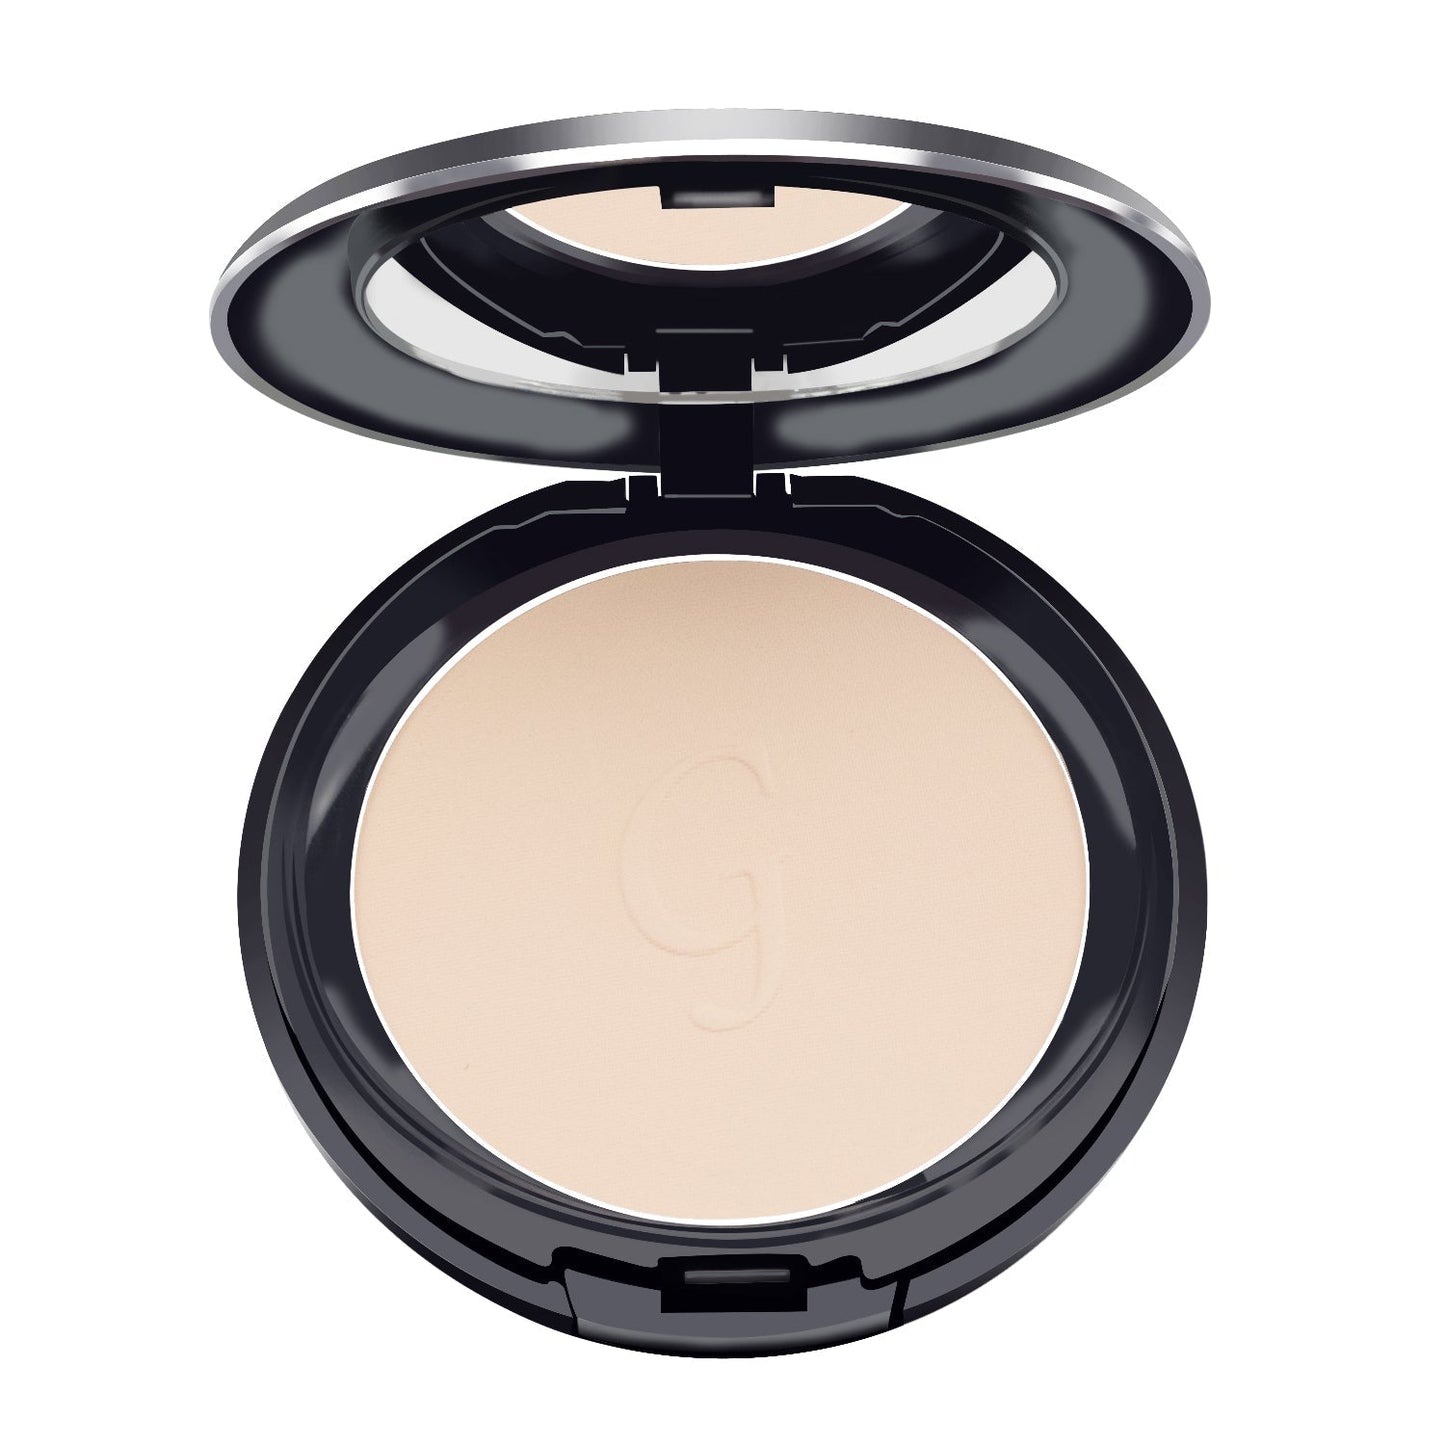 Glamgals Hollywood-U.S.A 3 In 1 Three Way Cake Compact Makeup+ Foundation + Concealer Spf 15 - BUDNE